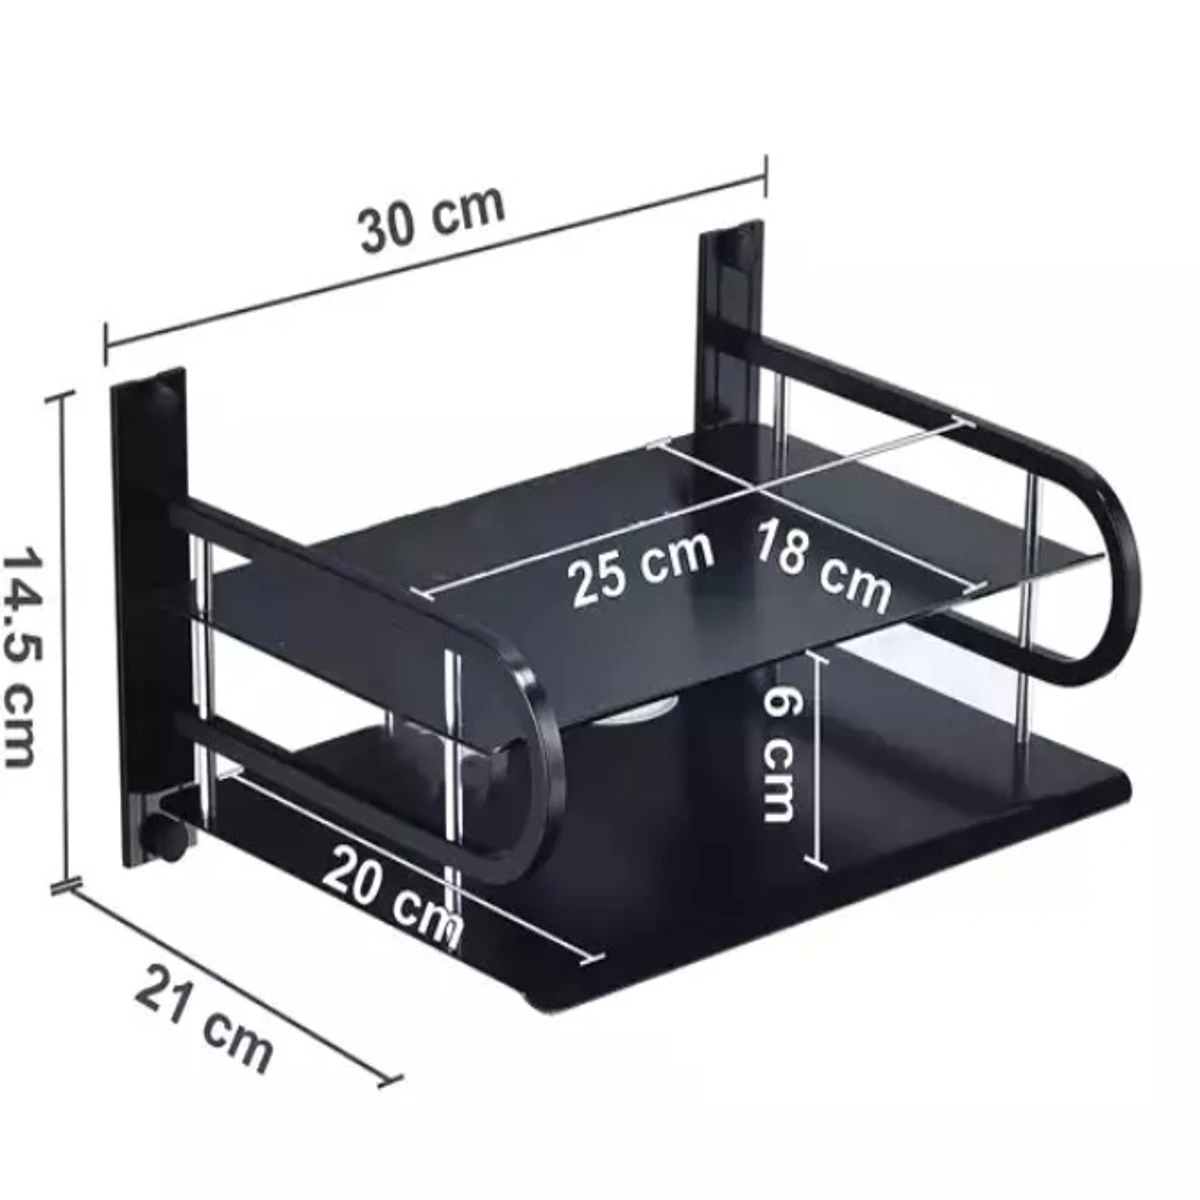 Carbon Steel Wall Mounted Router Stand